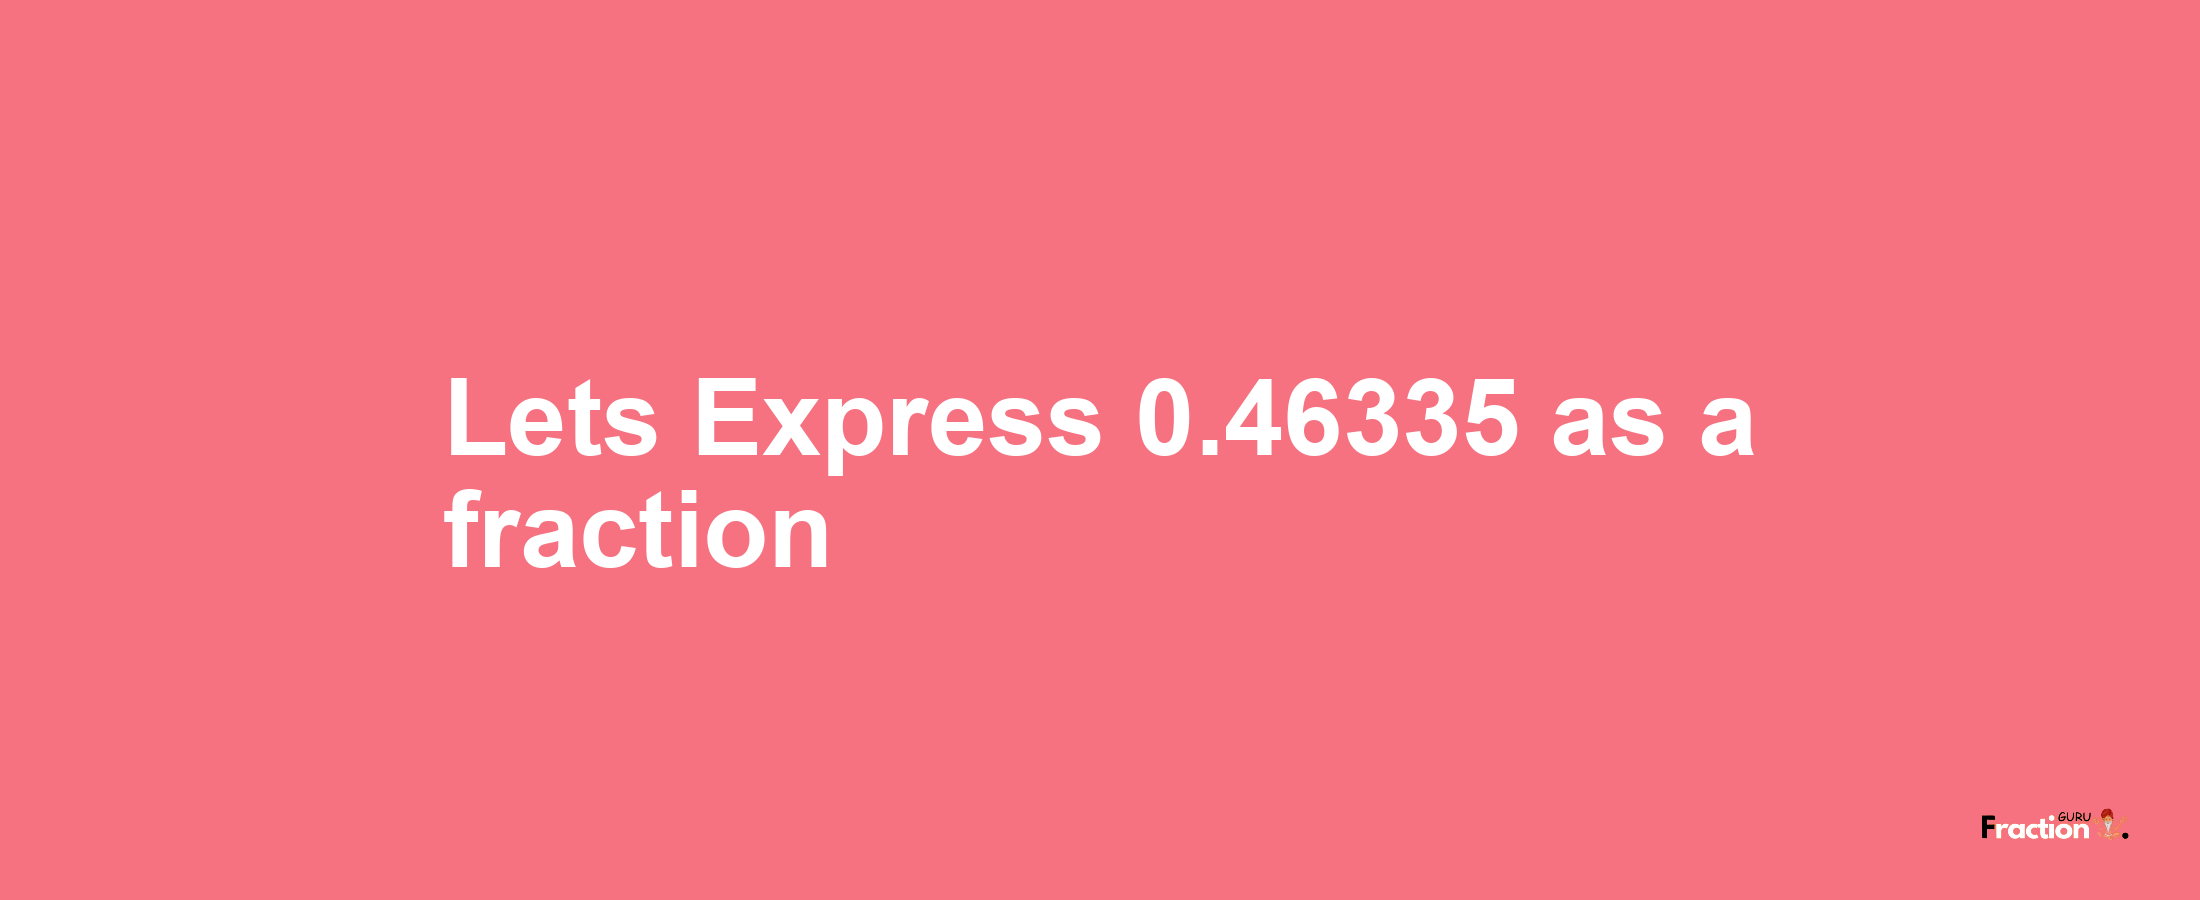 Lets Express 0.46335 as afraction